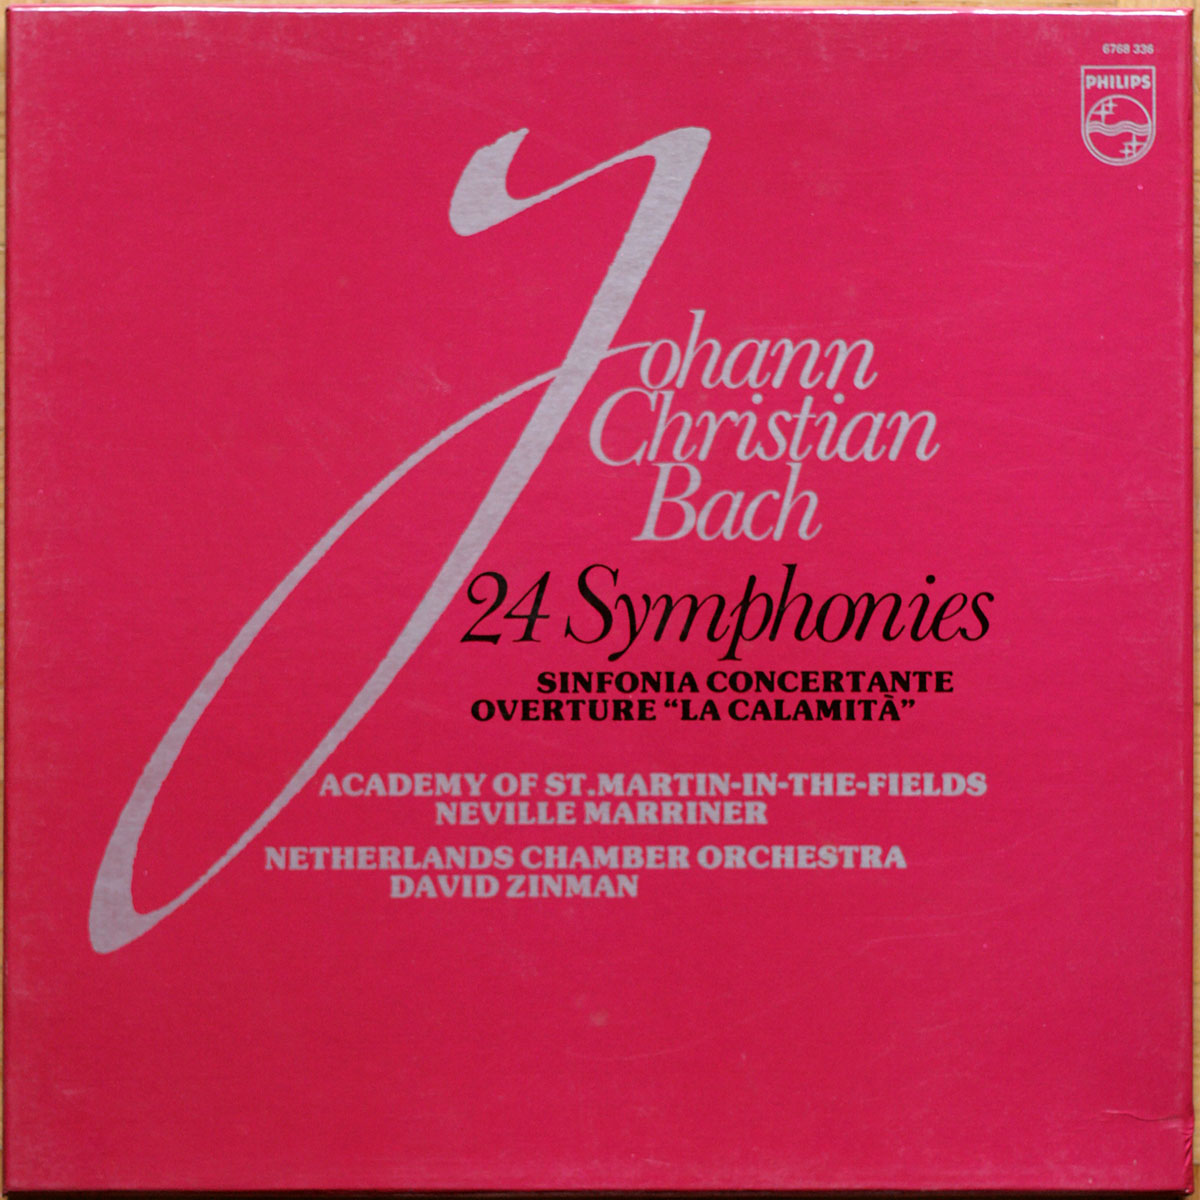 Johann Christian Bach • 24 Symphonies - Sinfonia Concertante • Philips 6768 336 • Netherlands Chamber Orchestra • David Zinman • Academy of St. Martin-in-the-Fields • Neville Marriner